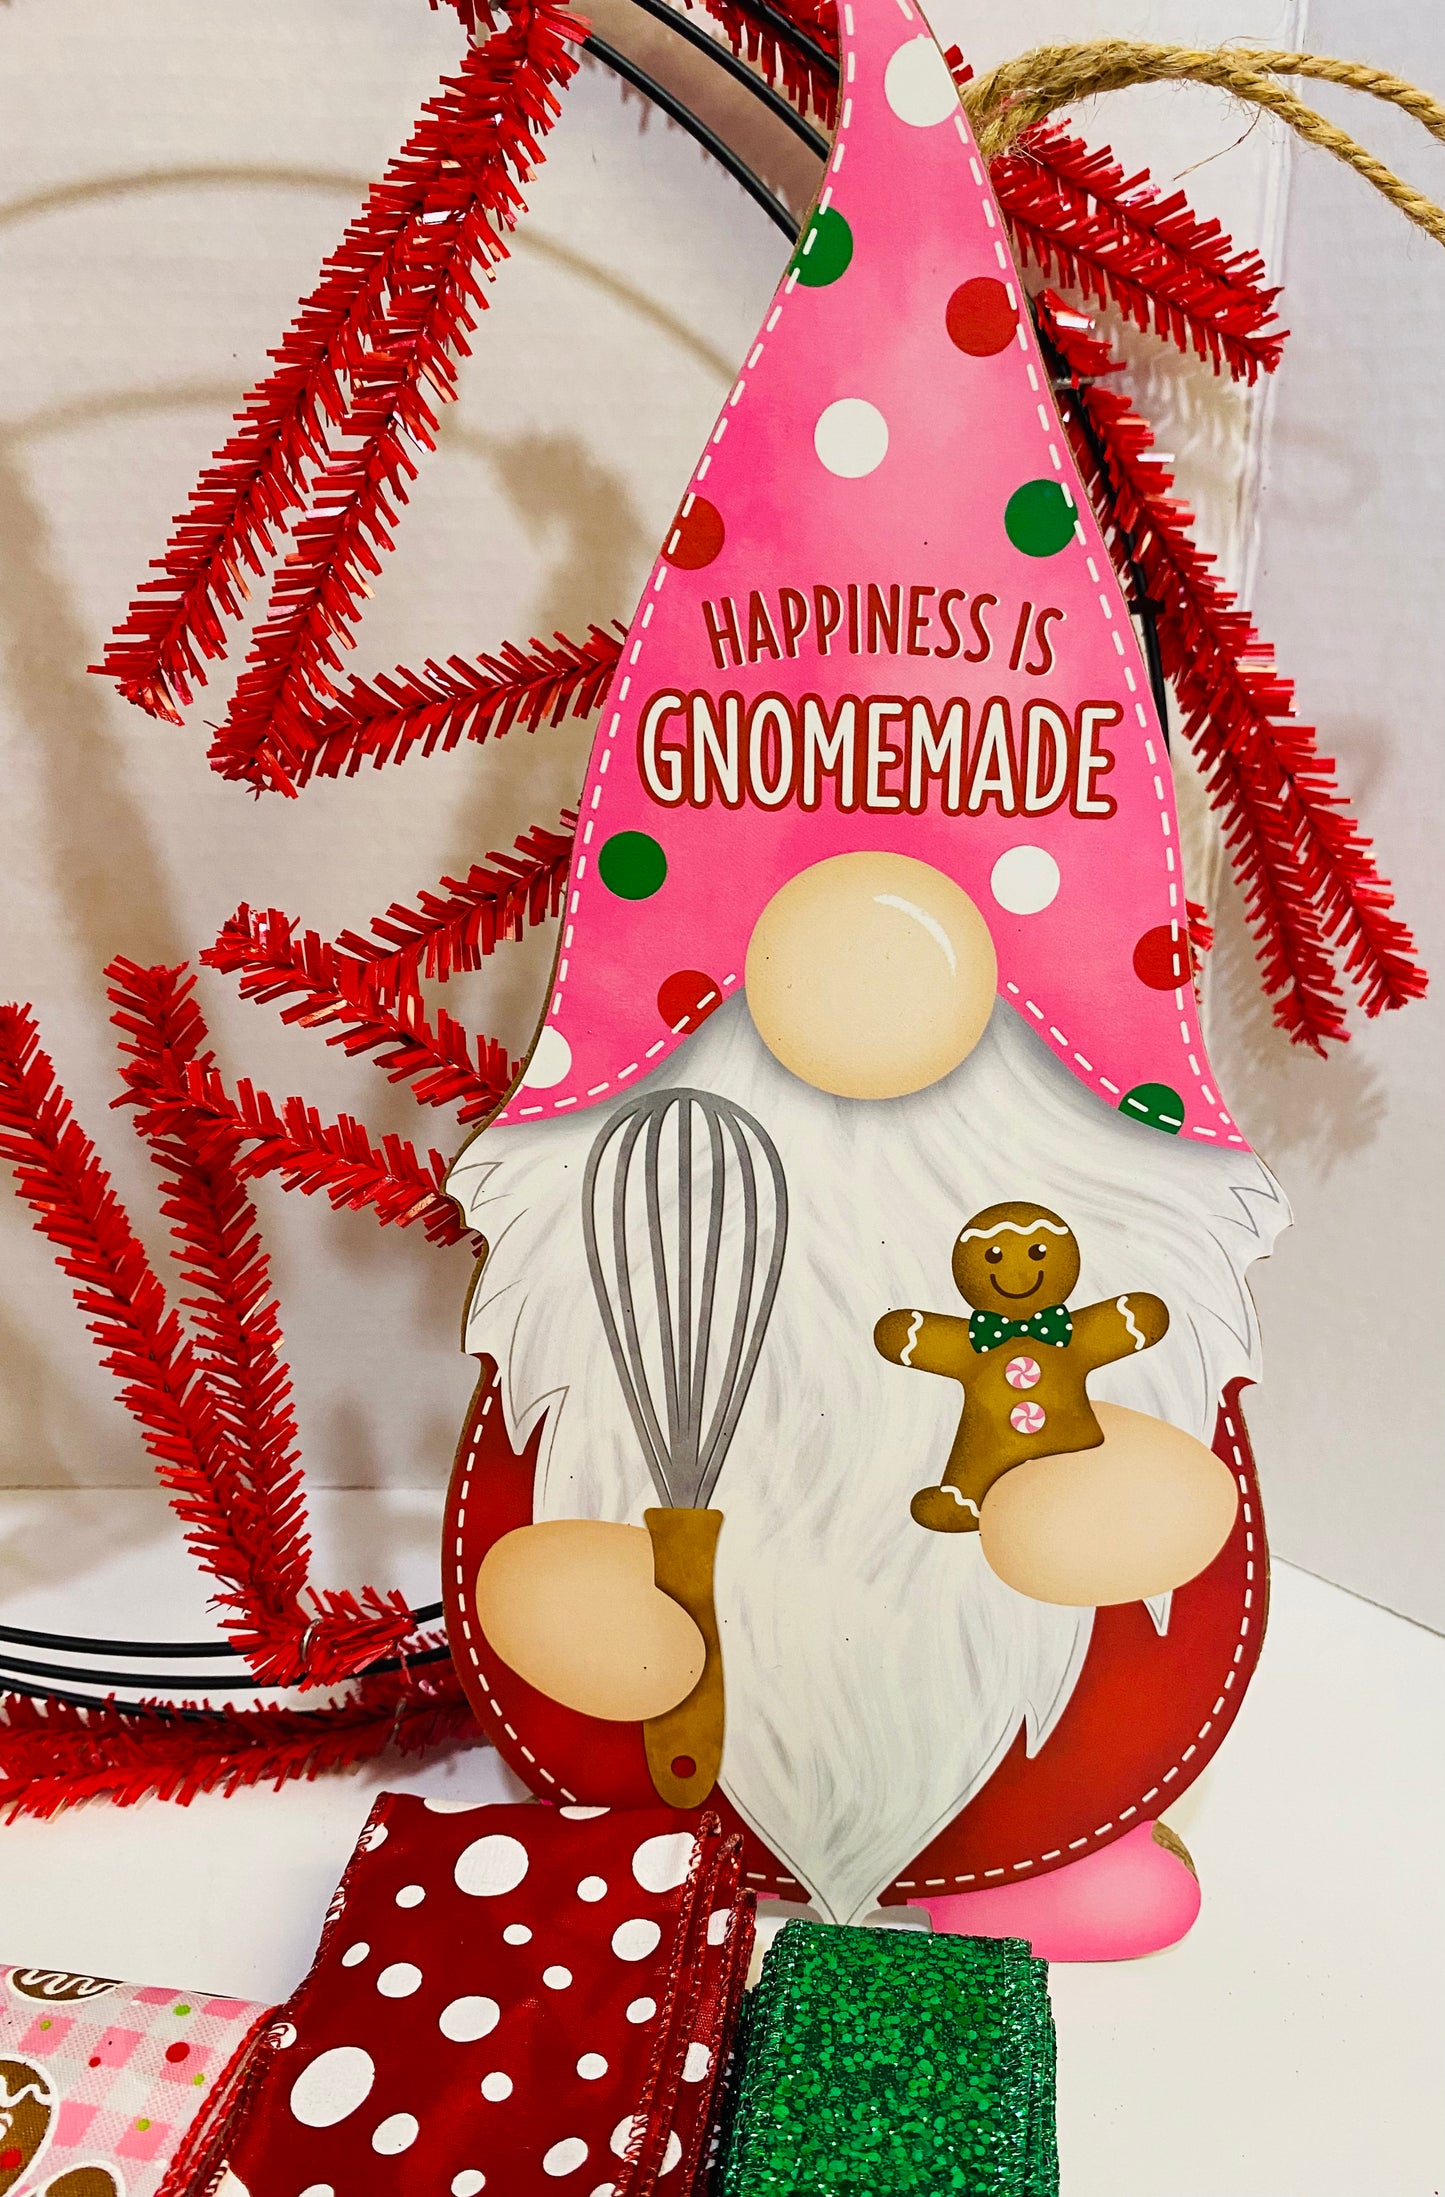 Party Kit - Happiness is Gnomemade! Christmas Winter Holiday DIY